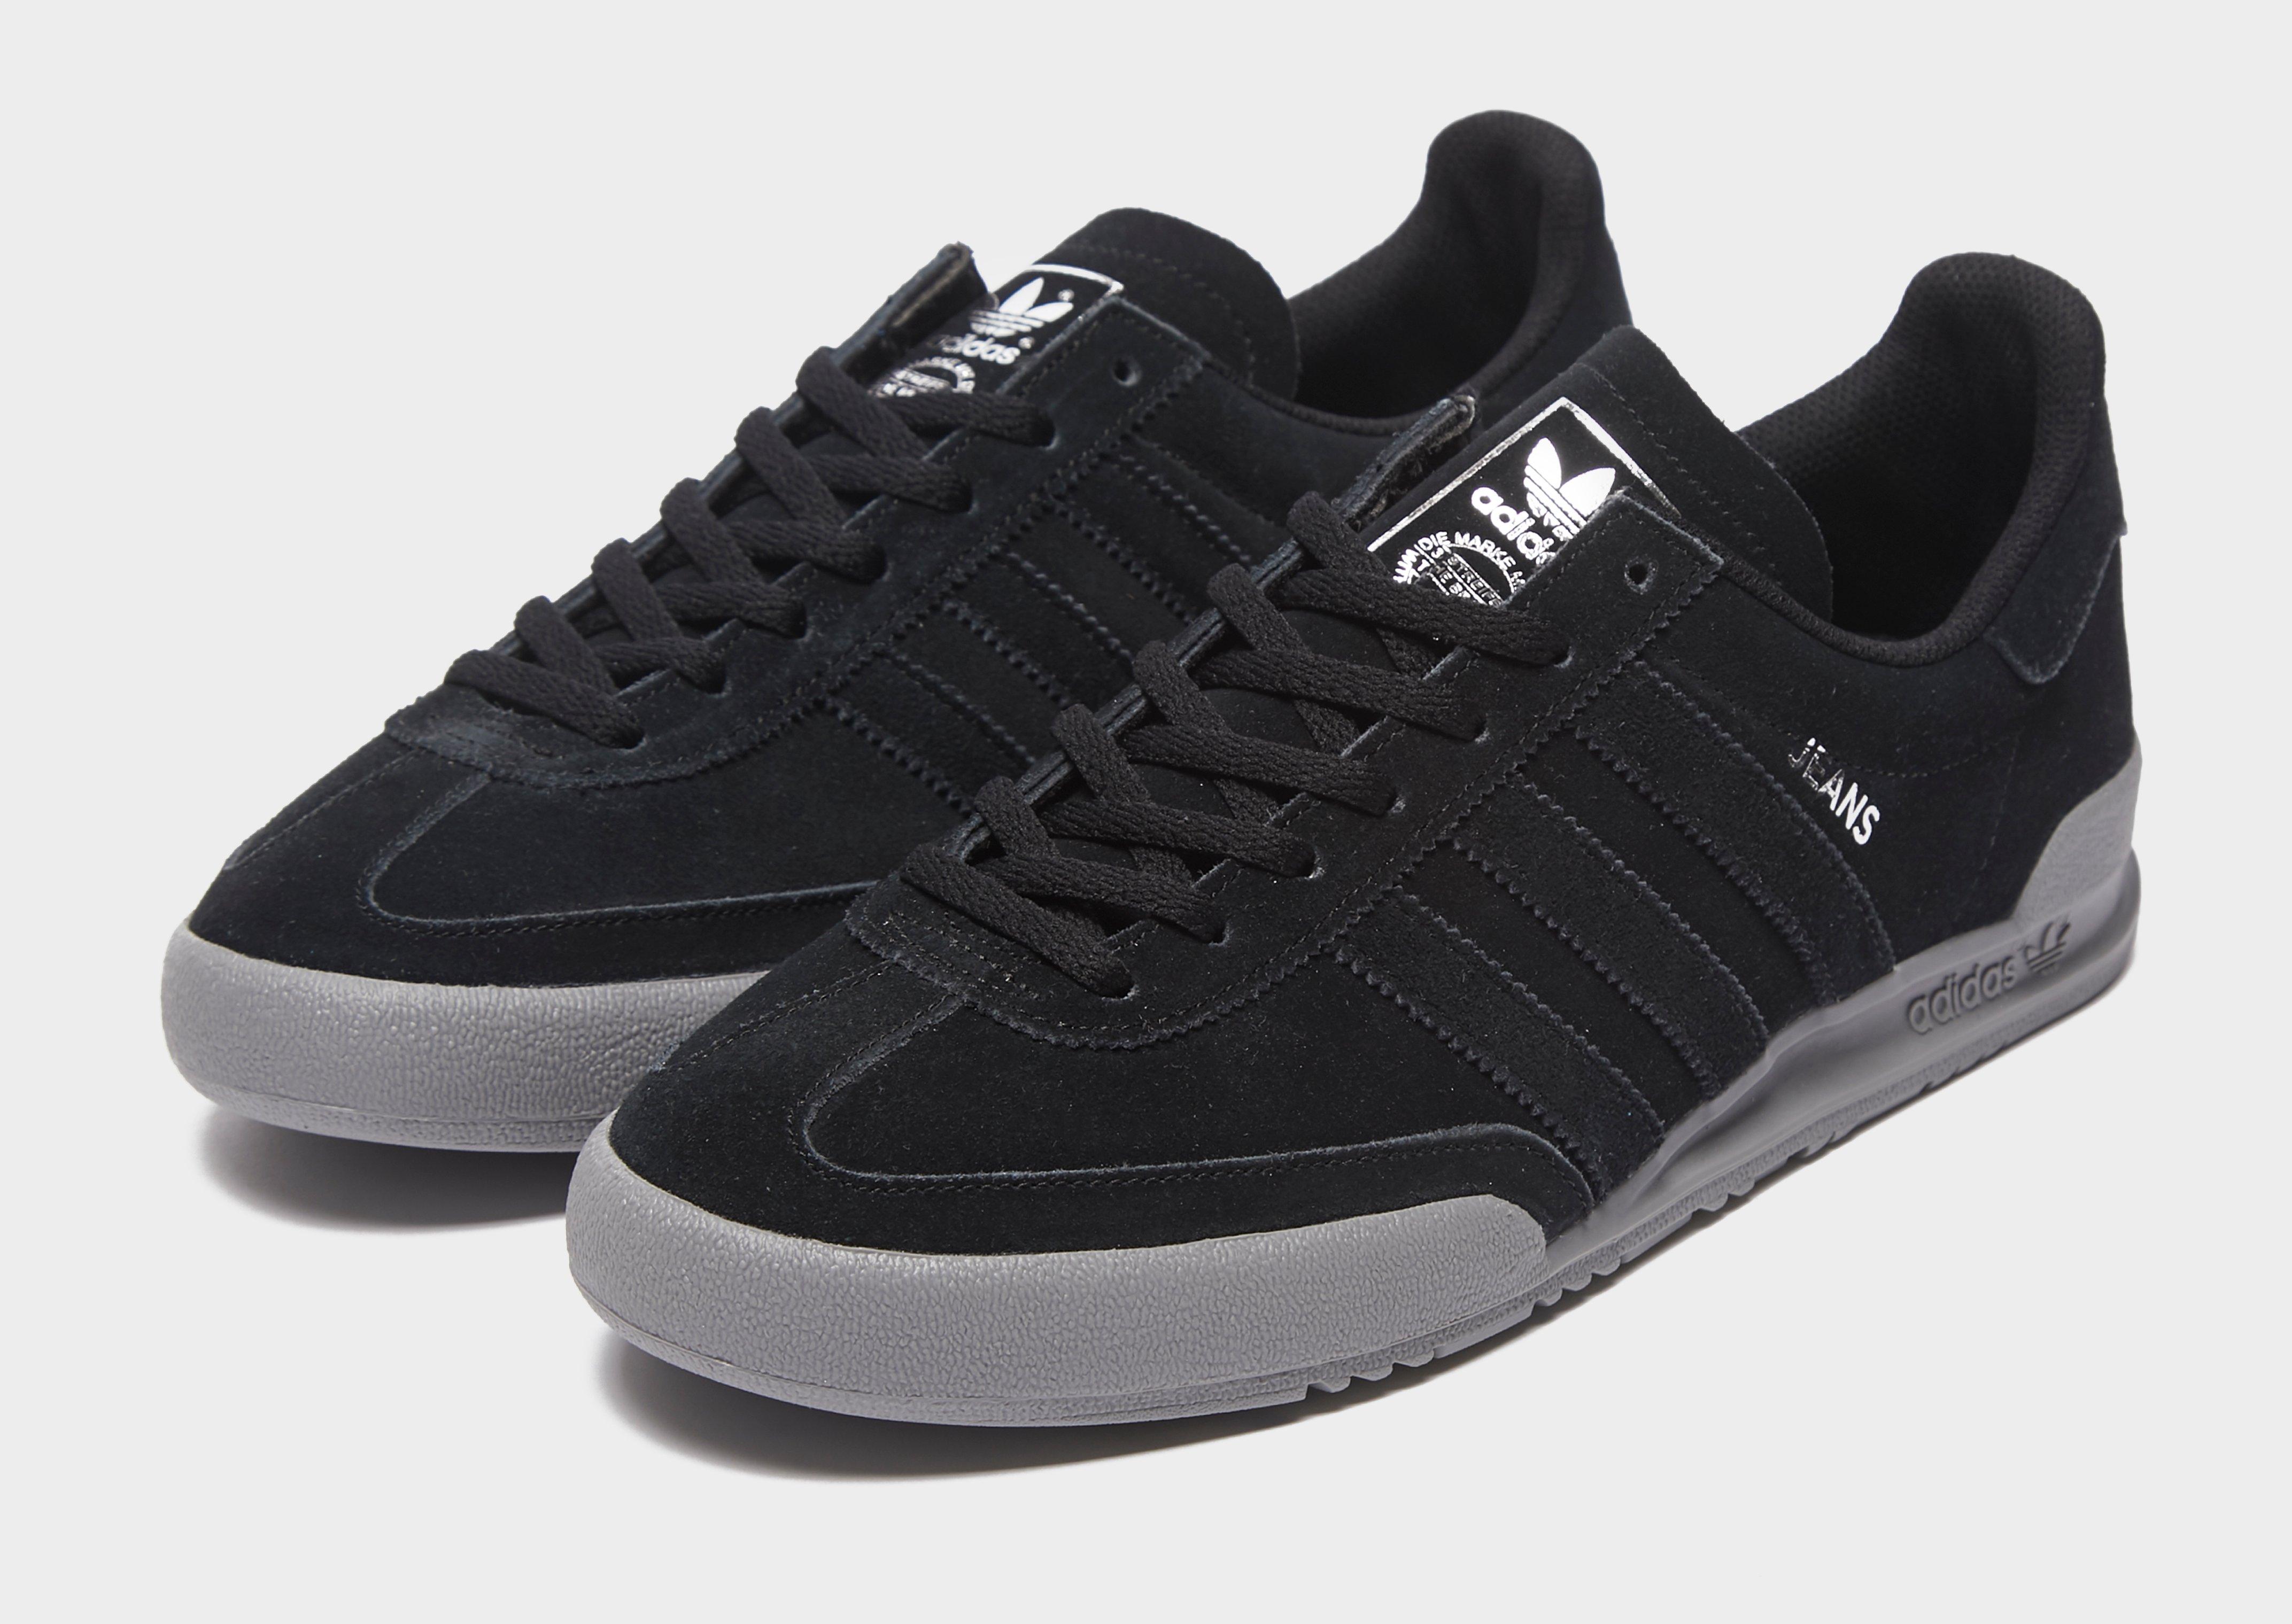 adidas jeans trainers jd sports